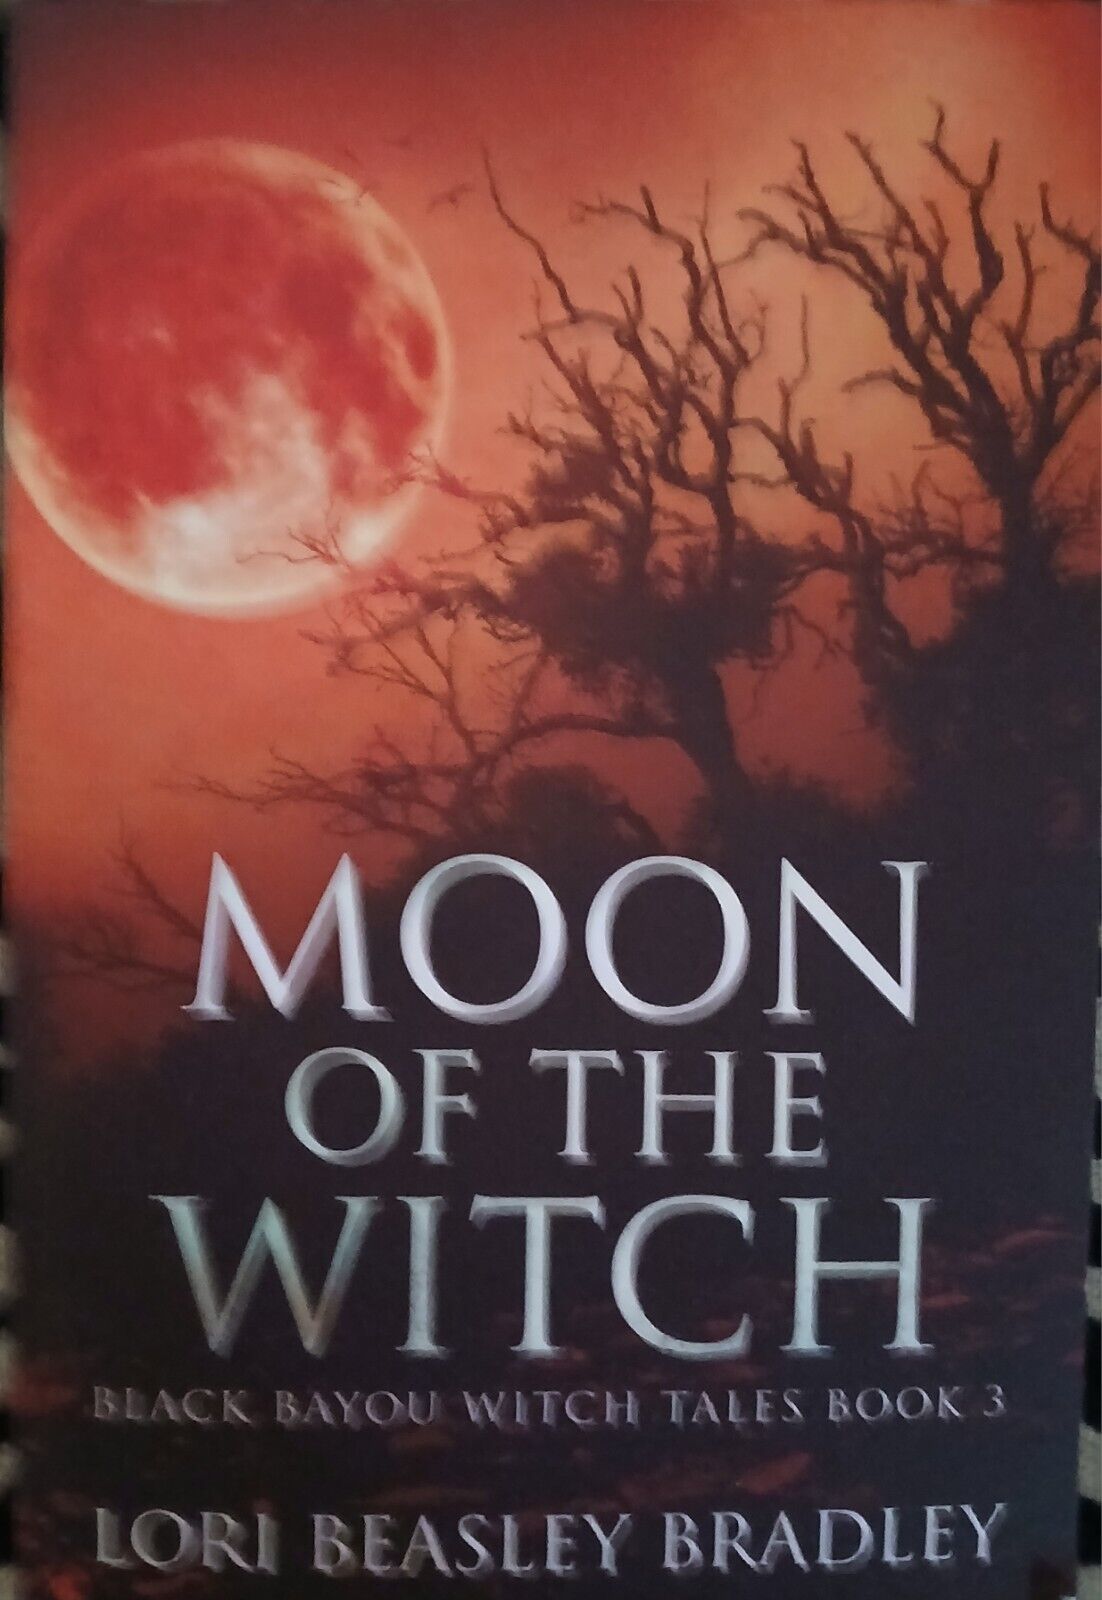 Moon of The Witch Black Bayou Witch Tales Book 3